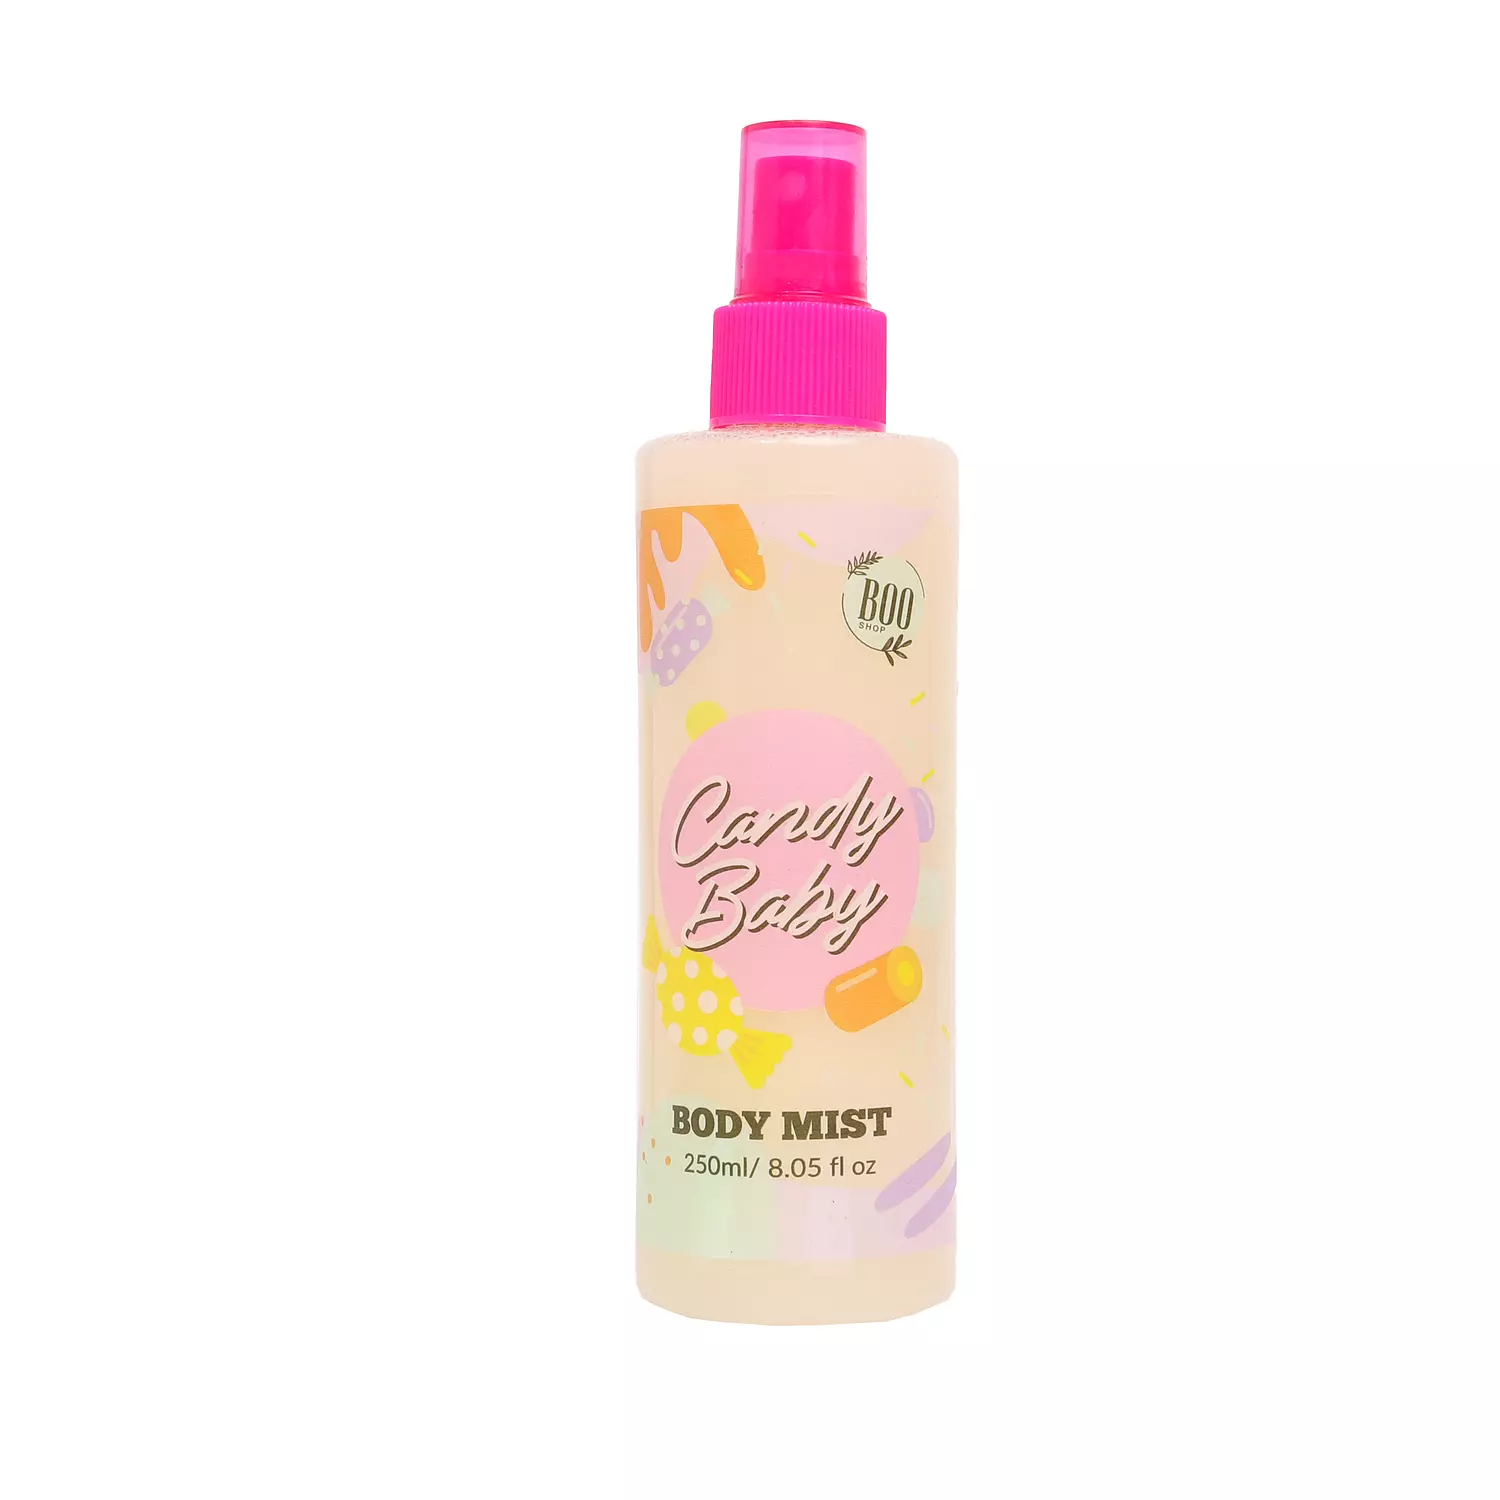 Candy baby body mist hover image